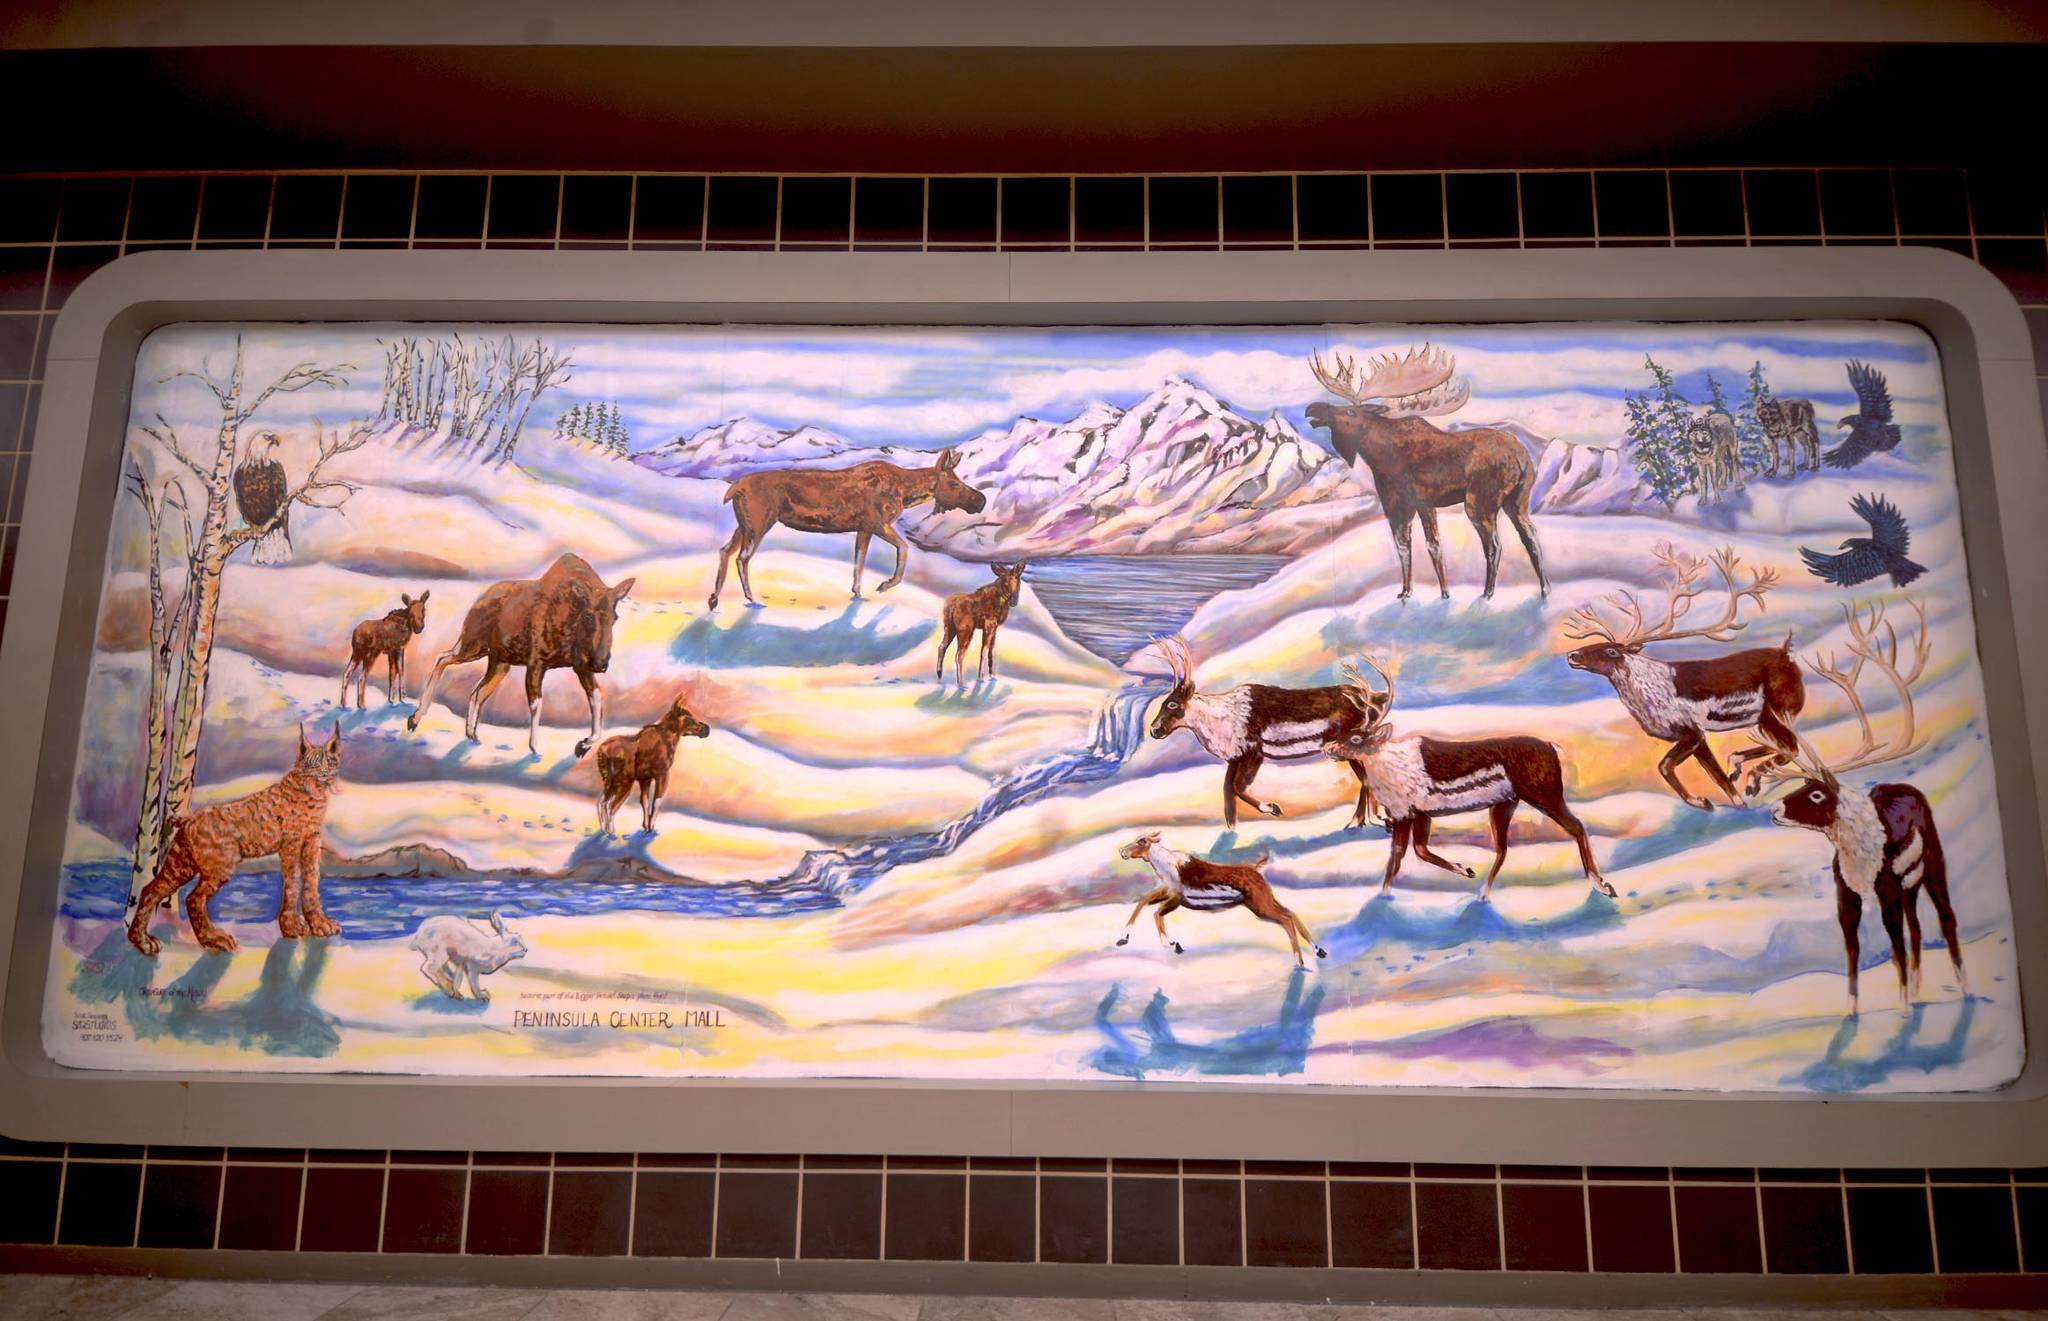 This Tuesday, Nov. 7, 2017 photograph shows the mural that artist Suzie Shrivener finished painting Saturday over a store-front window at the Peninsula Center Mall in Soldotna, Alaska. Shrivener, who began painting about two years ago after an injury, did the latex paint and airbrushed mural — her first — after setting up a display of her work in the mall’s nearby showcase. She offered the mural to the mall for free to get experience in window painting. “Painting’s relatively new to me, so to work on something that big, I didn’t know how it would turn out,” Shrivener said. “I didn’t know what would happen, but I thought it was a good opportunity.” (Photo by Ben Boettger/Peninsula Clarion)